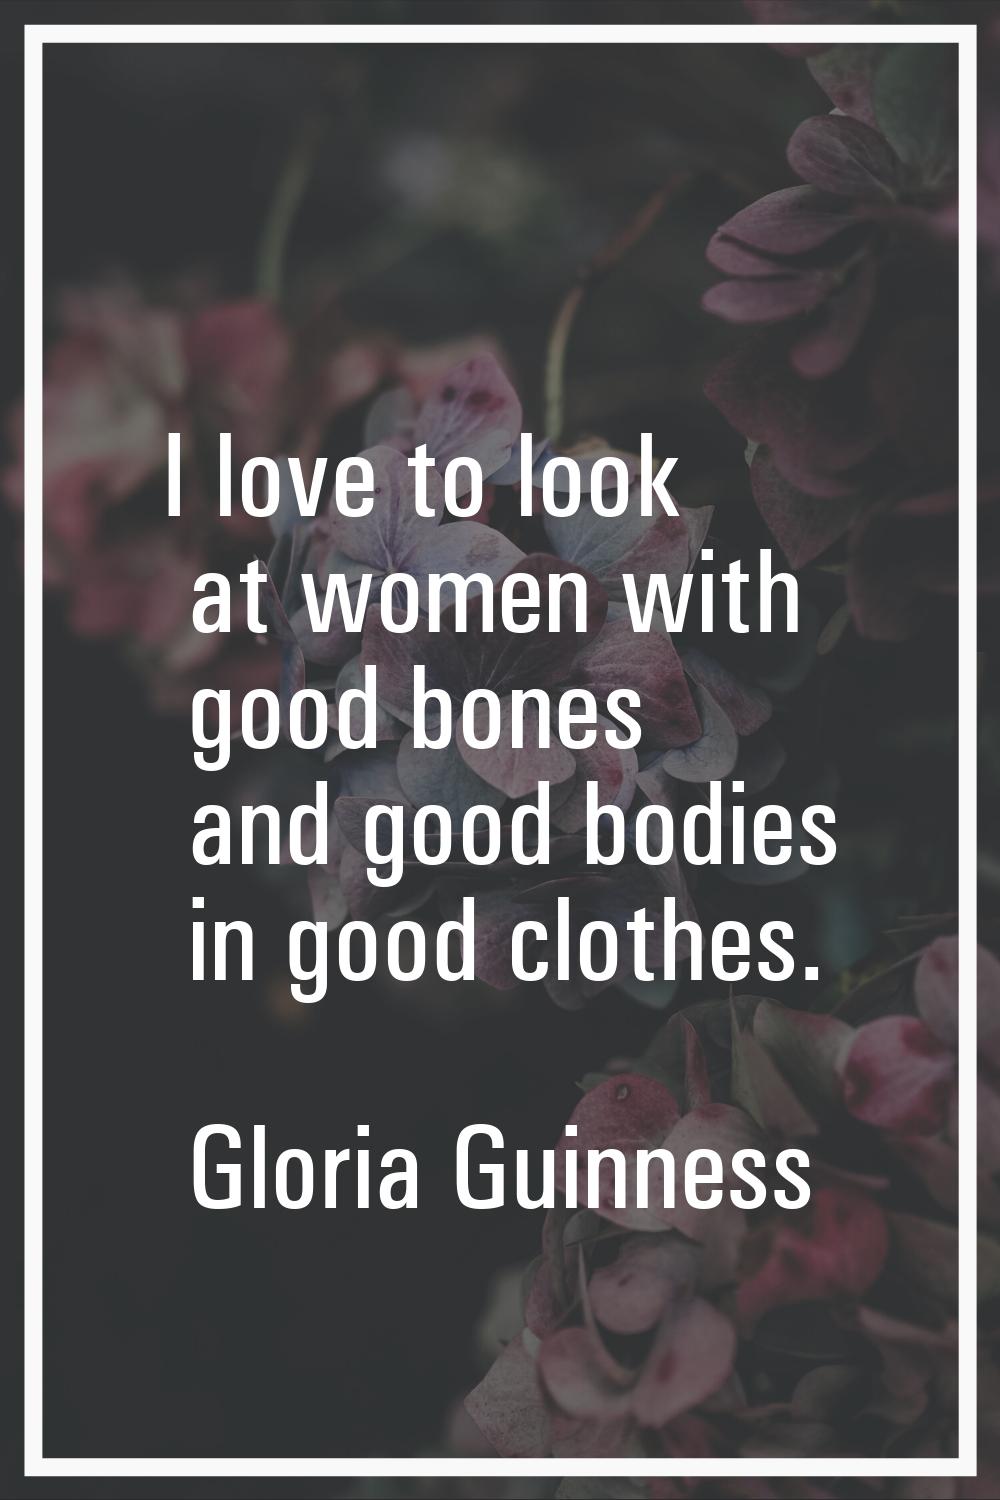 I love to look at women with good bones and good bodies in good clothes.